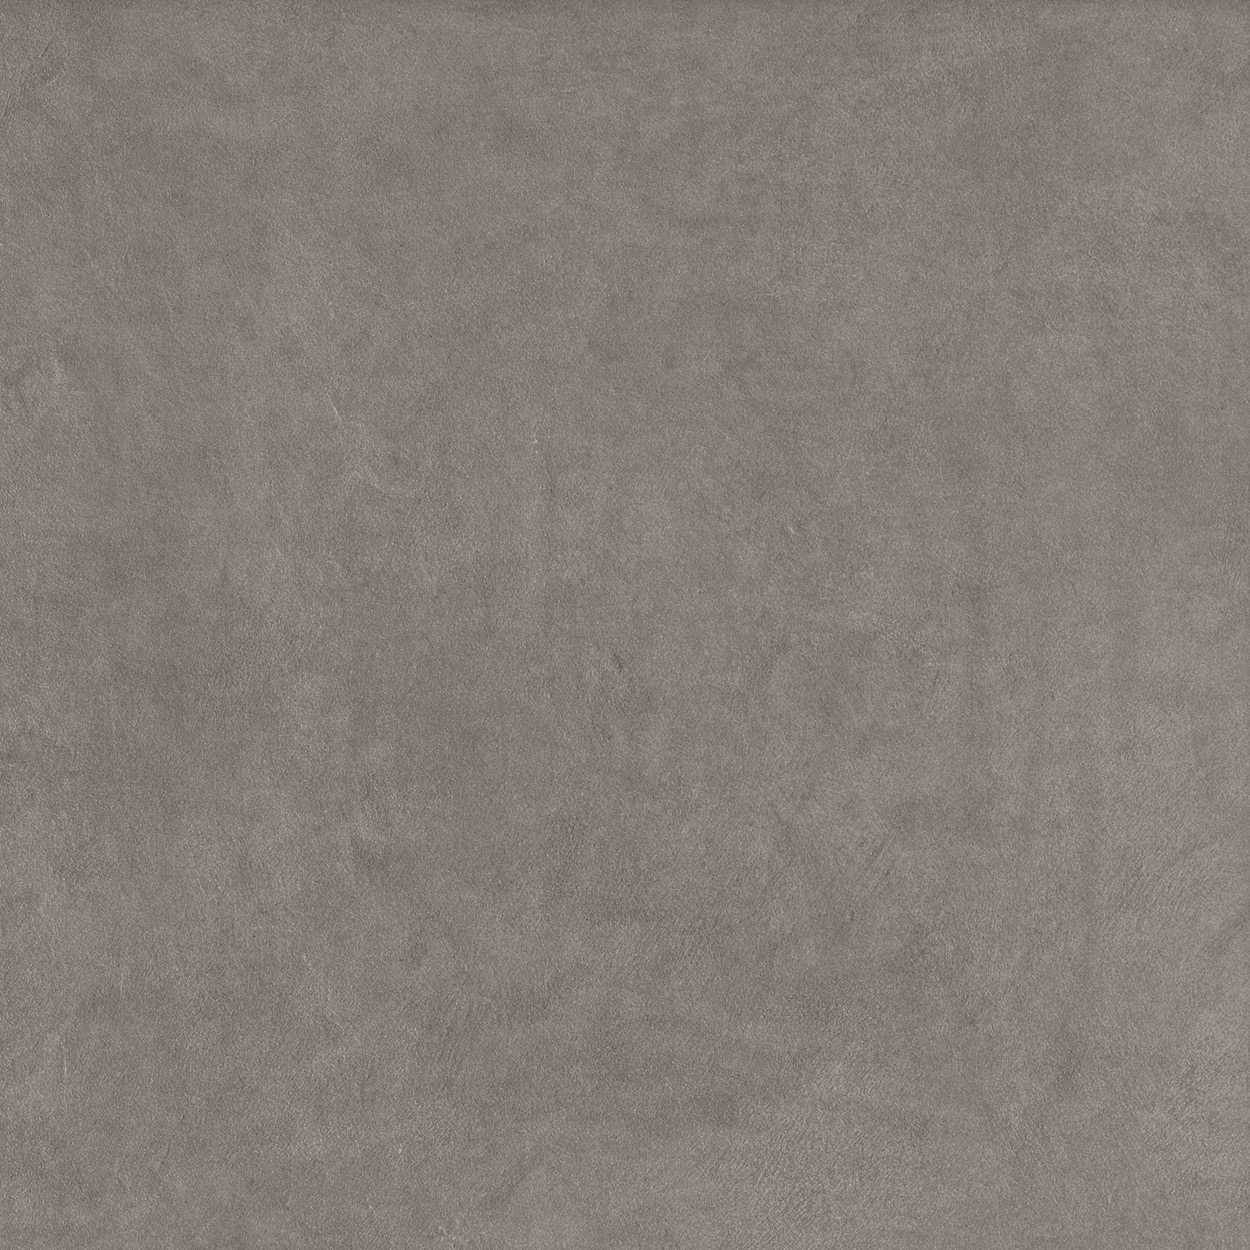 32 x 32 Seamless WR_03 Porcelain tile (SPECIAL ORDER ONLY)